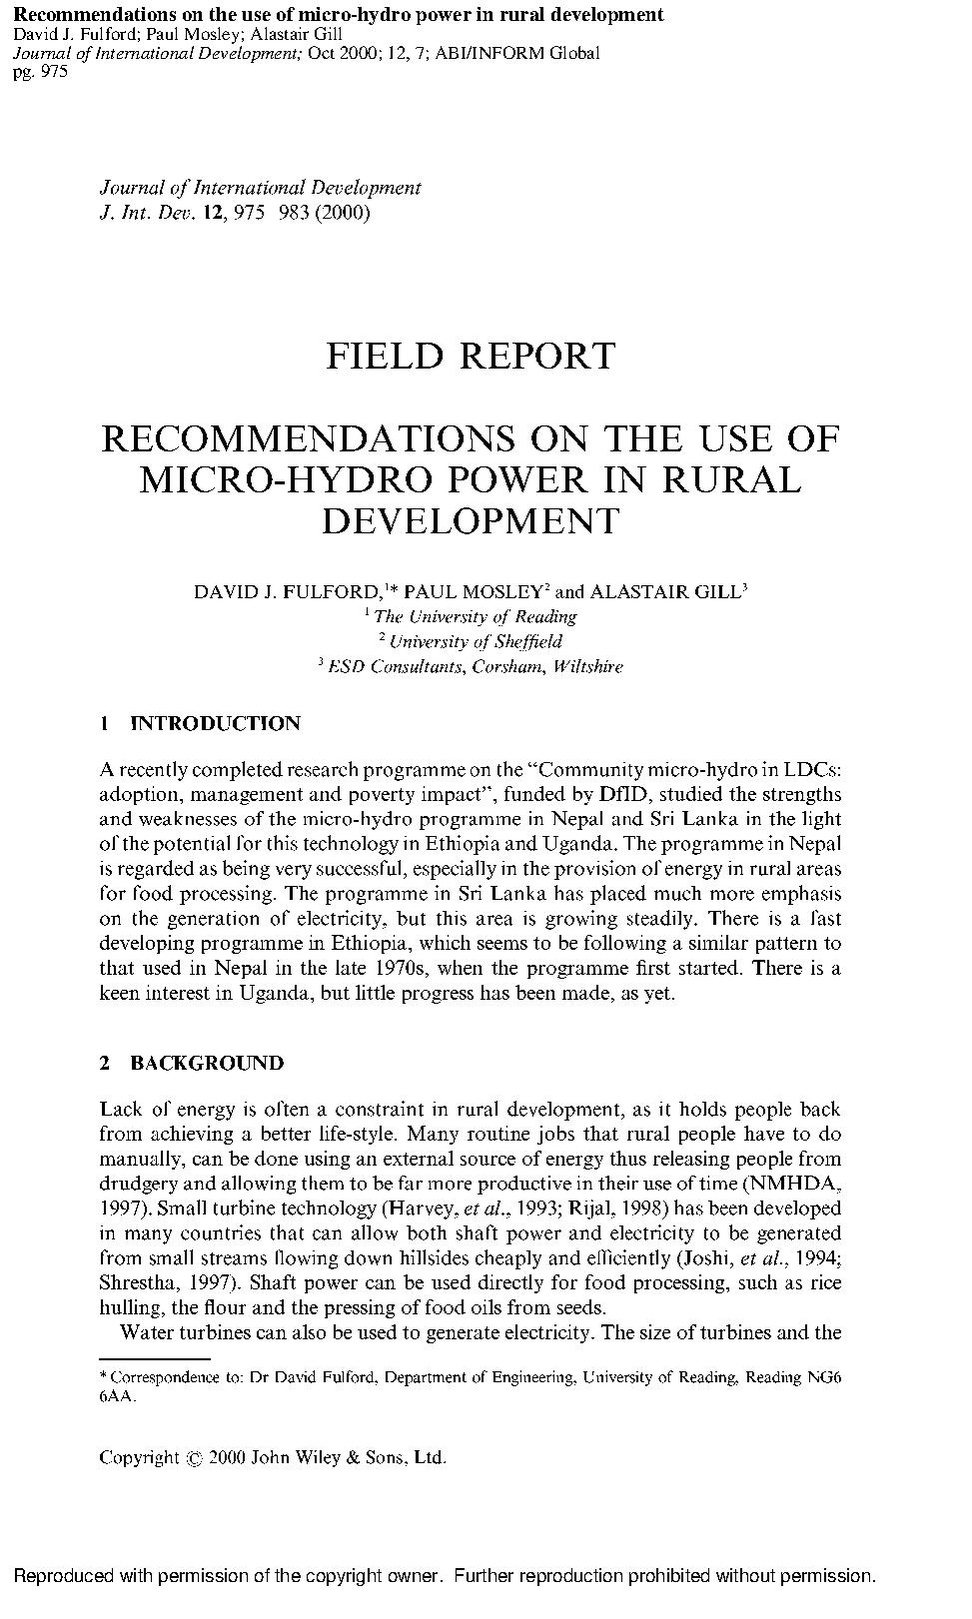 Recommendations on the Use of Mico-Hydro Power in Rural Development